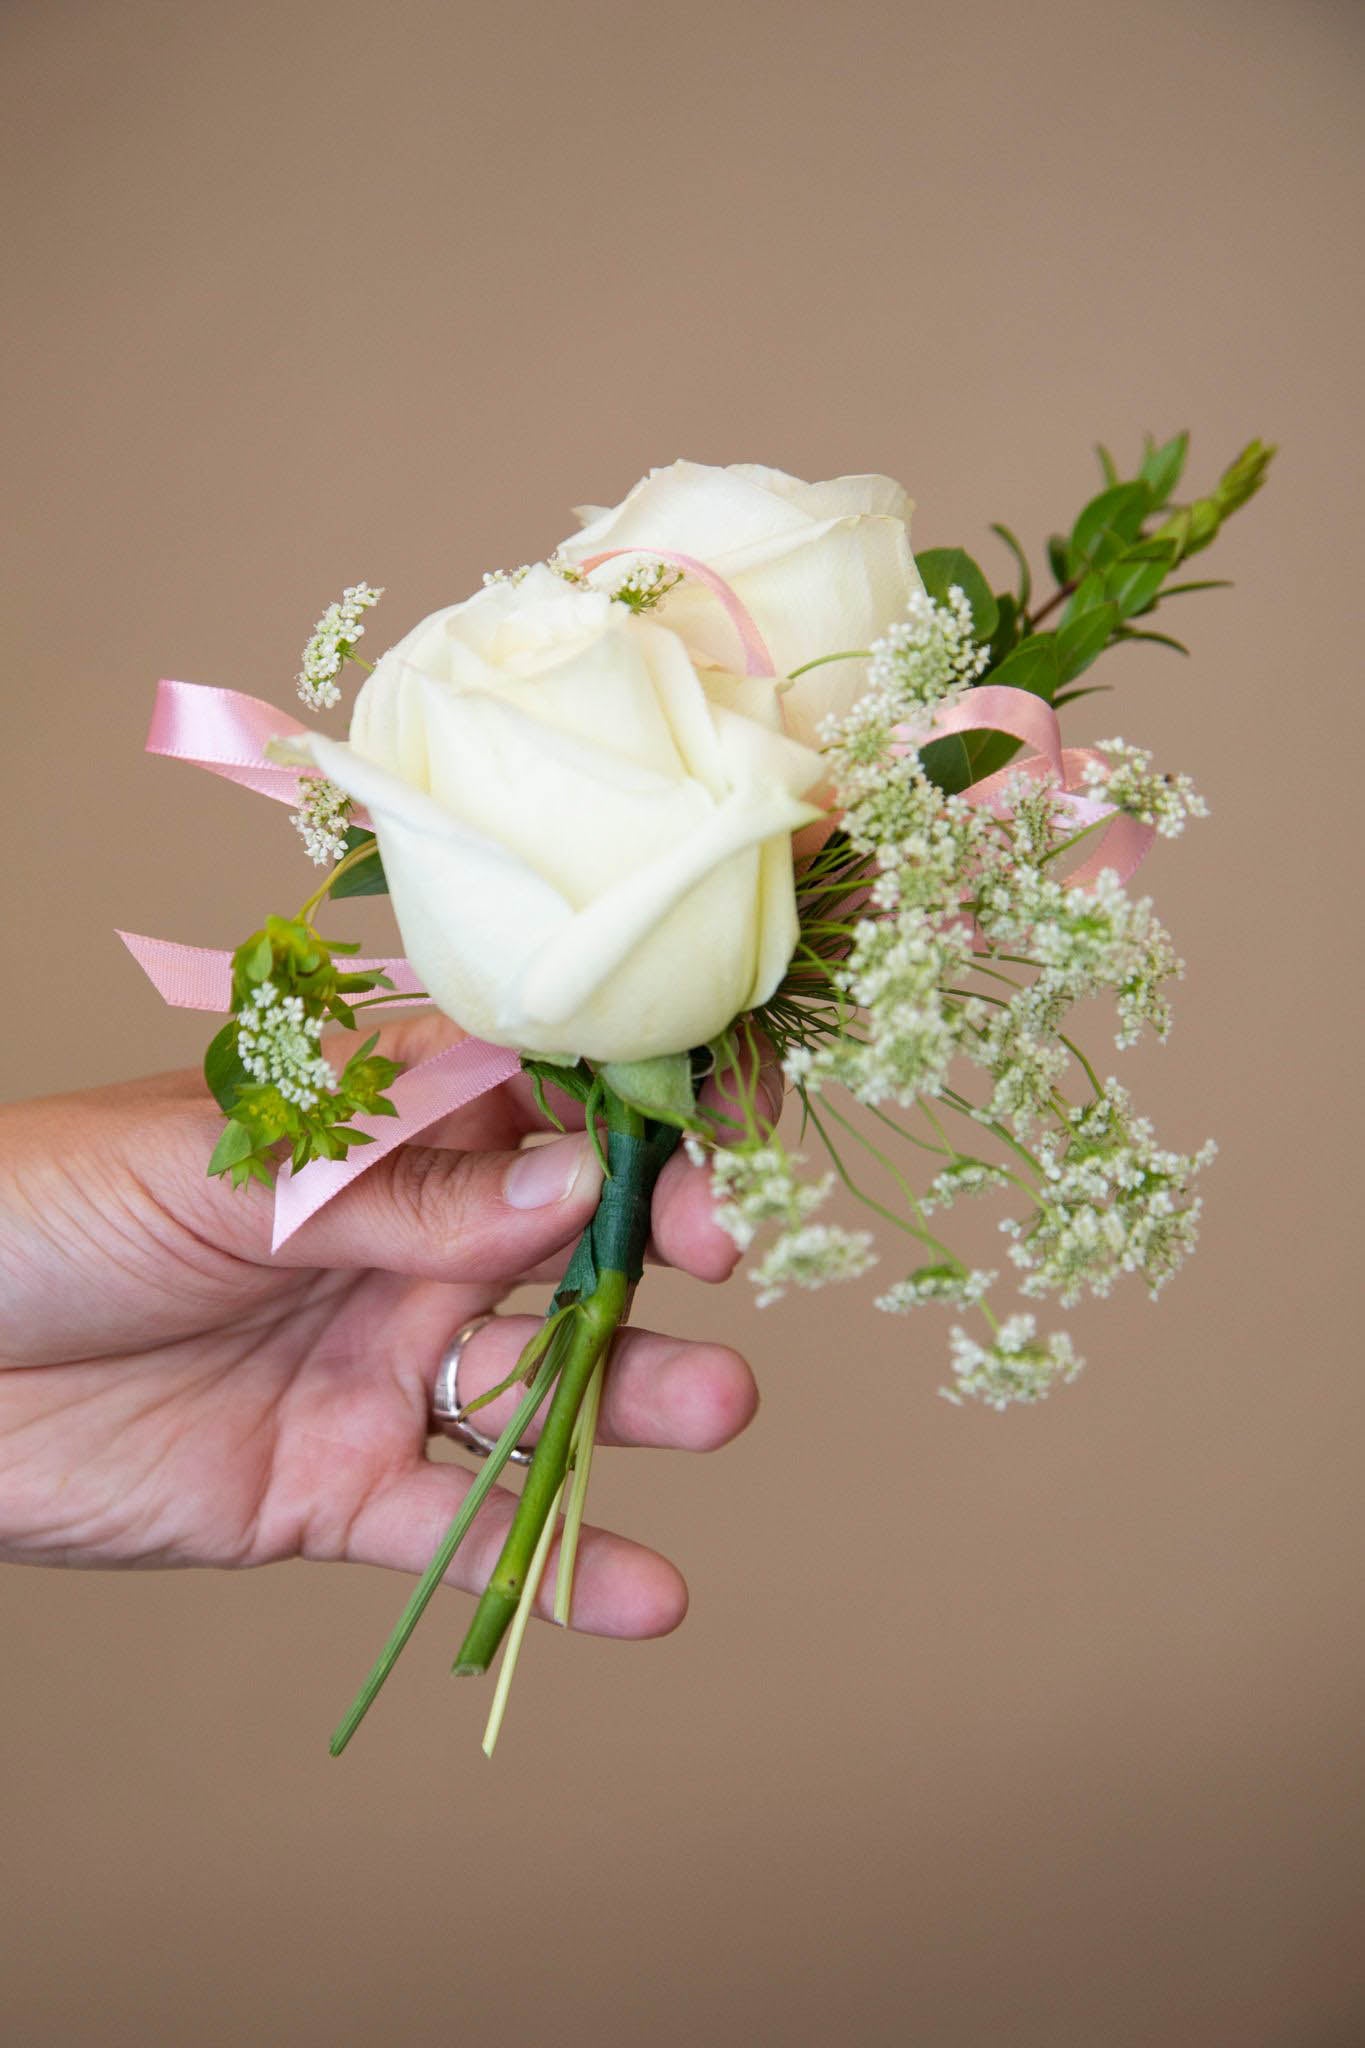 Continue adding filler flowers, focal flowers, and greenery until you are satisfied with your DIY corsage